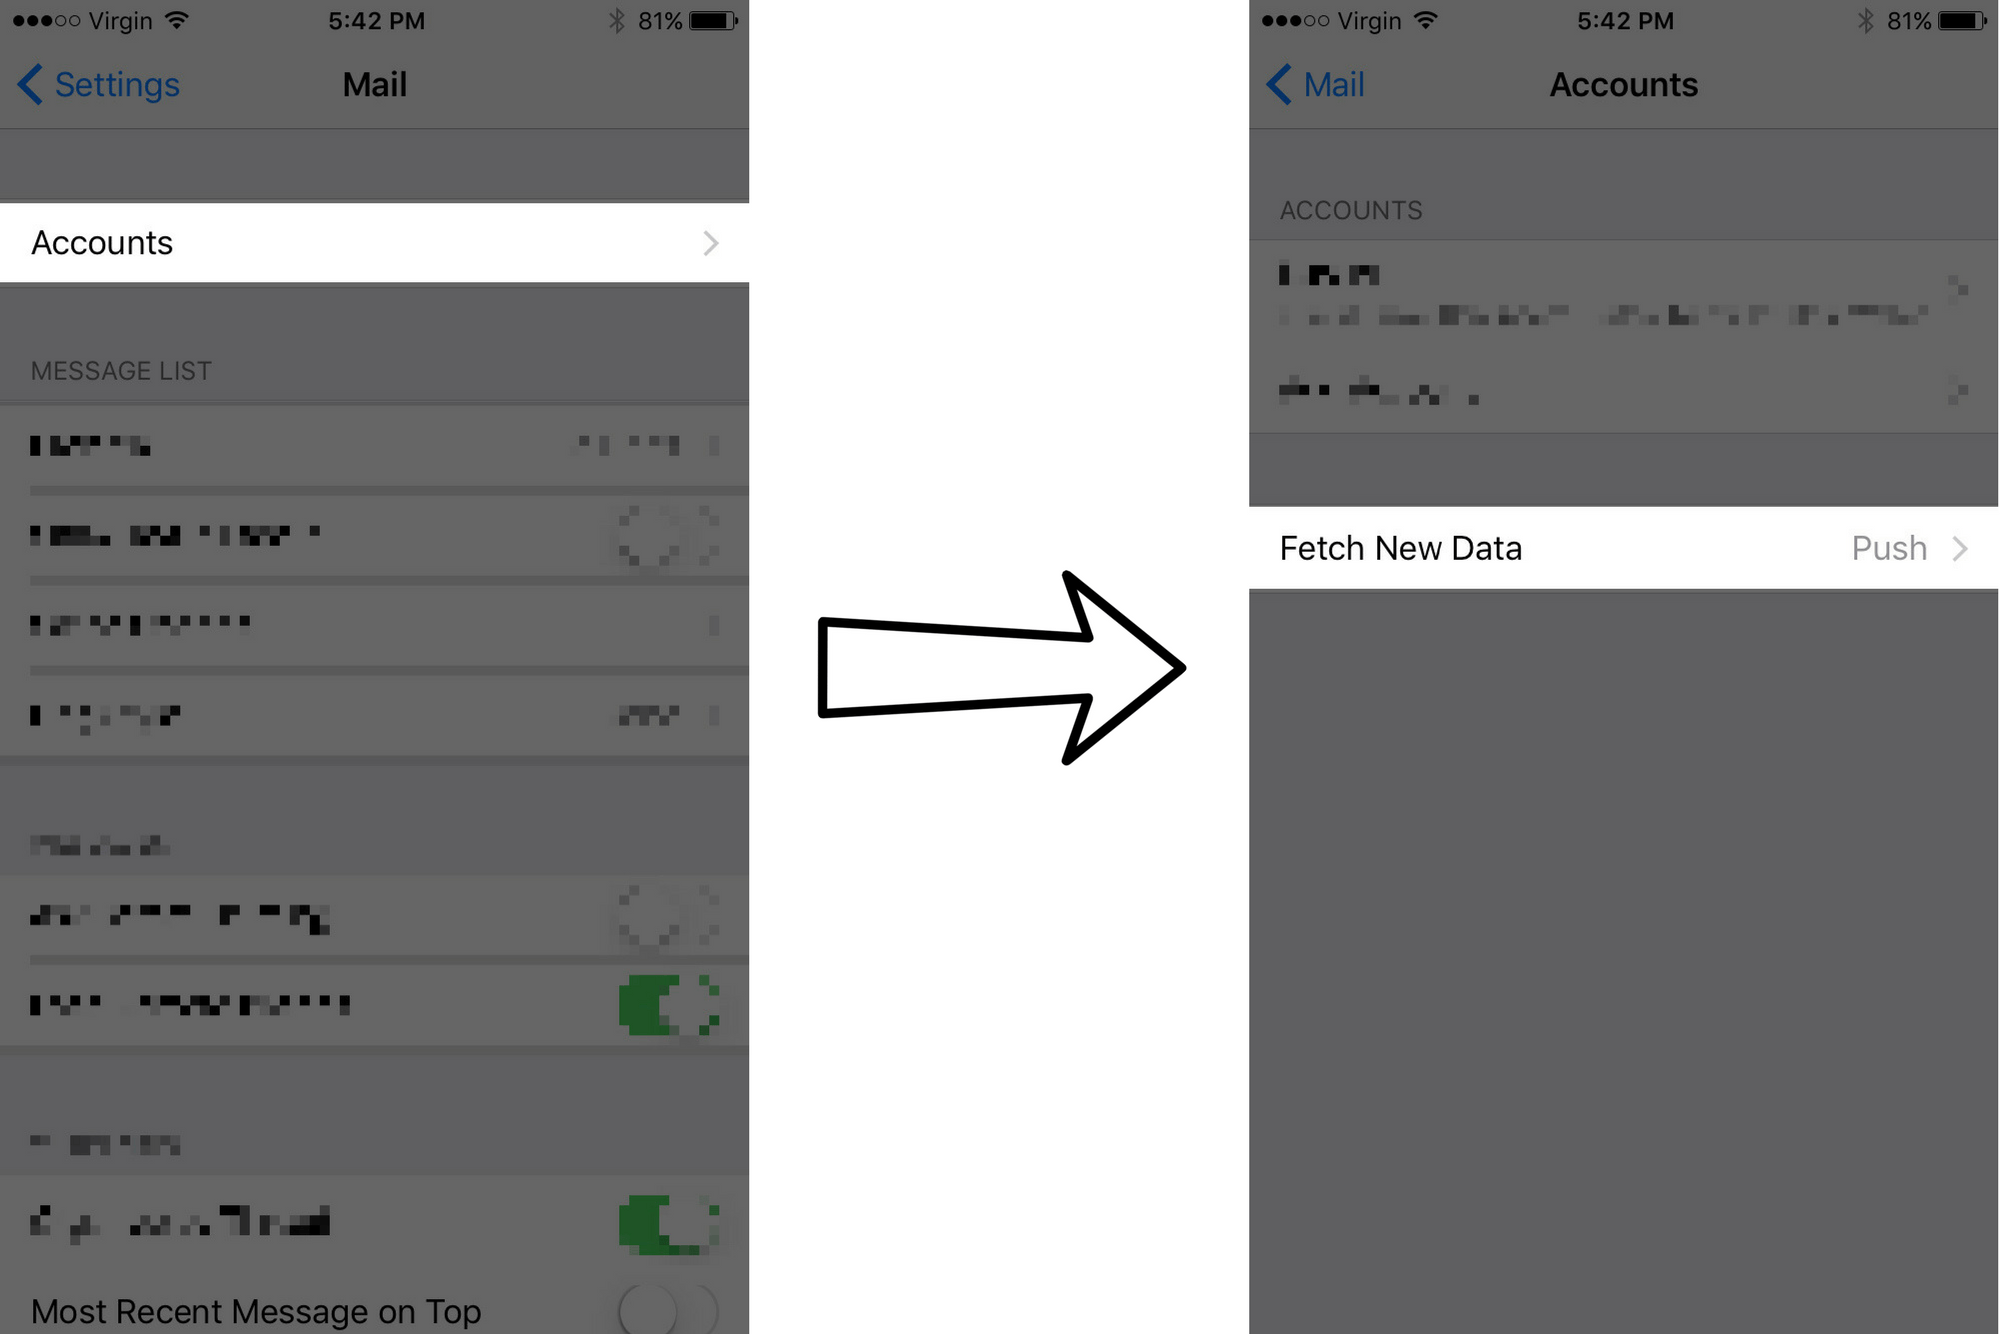 tap account tap fetch new data